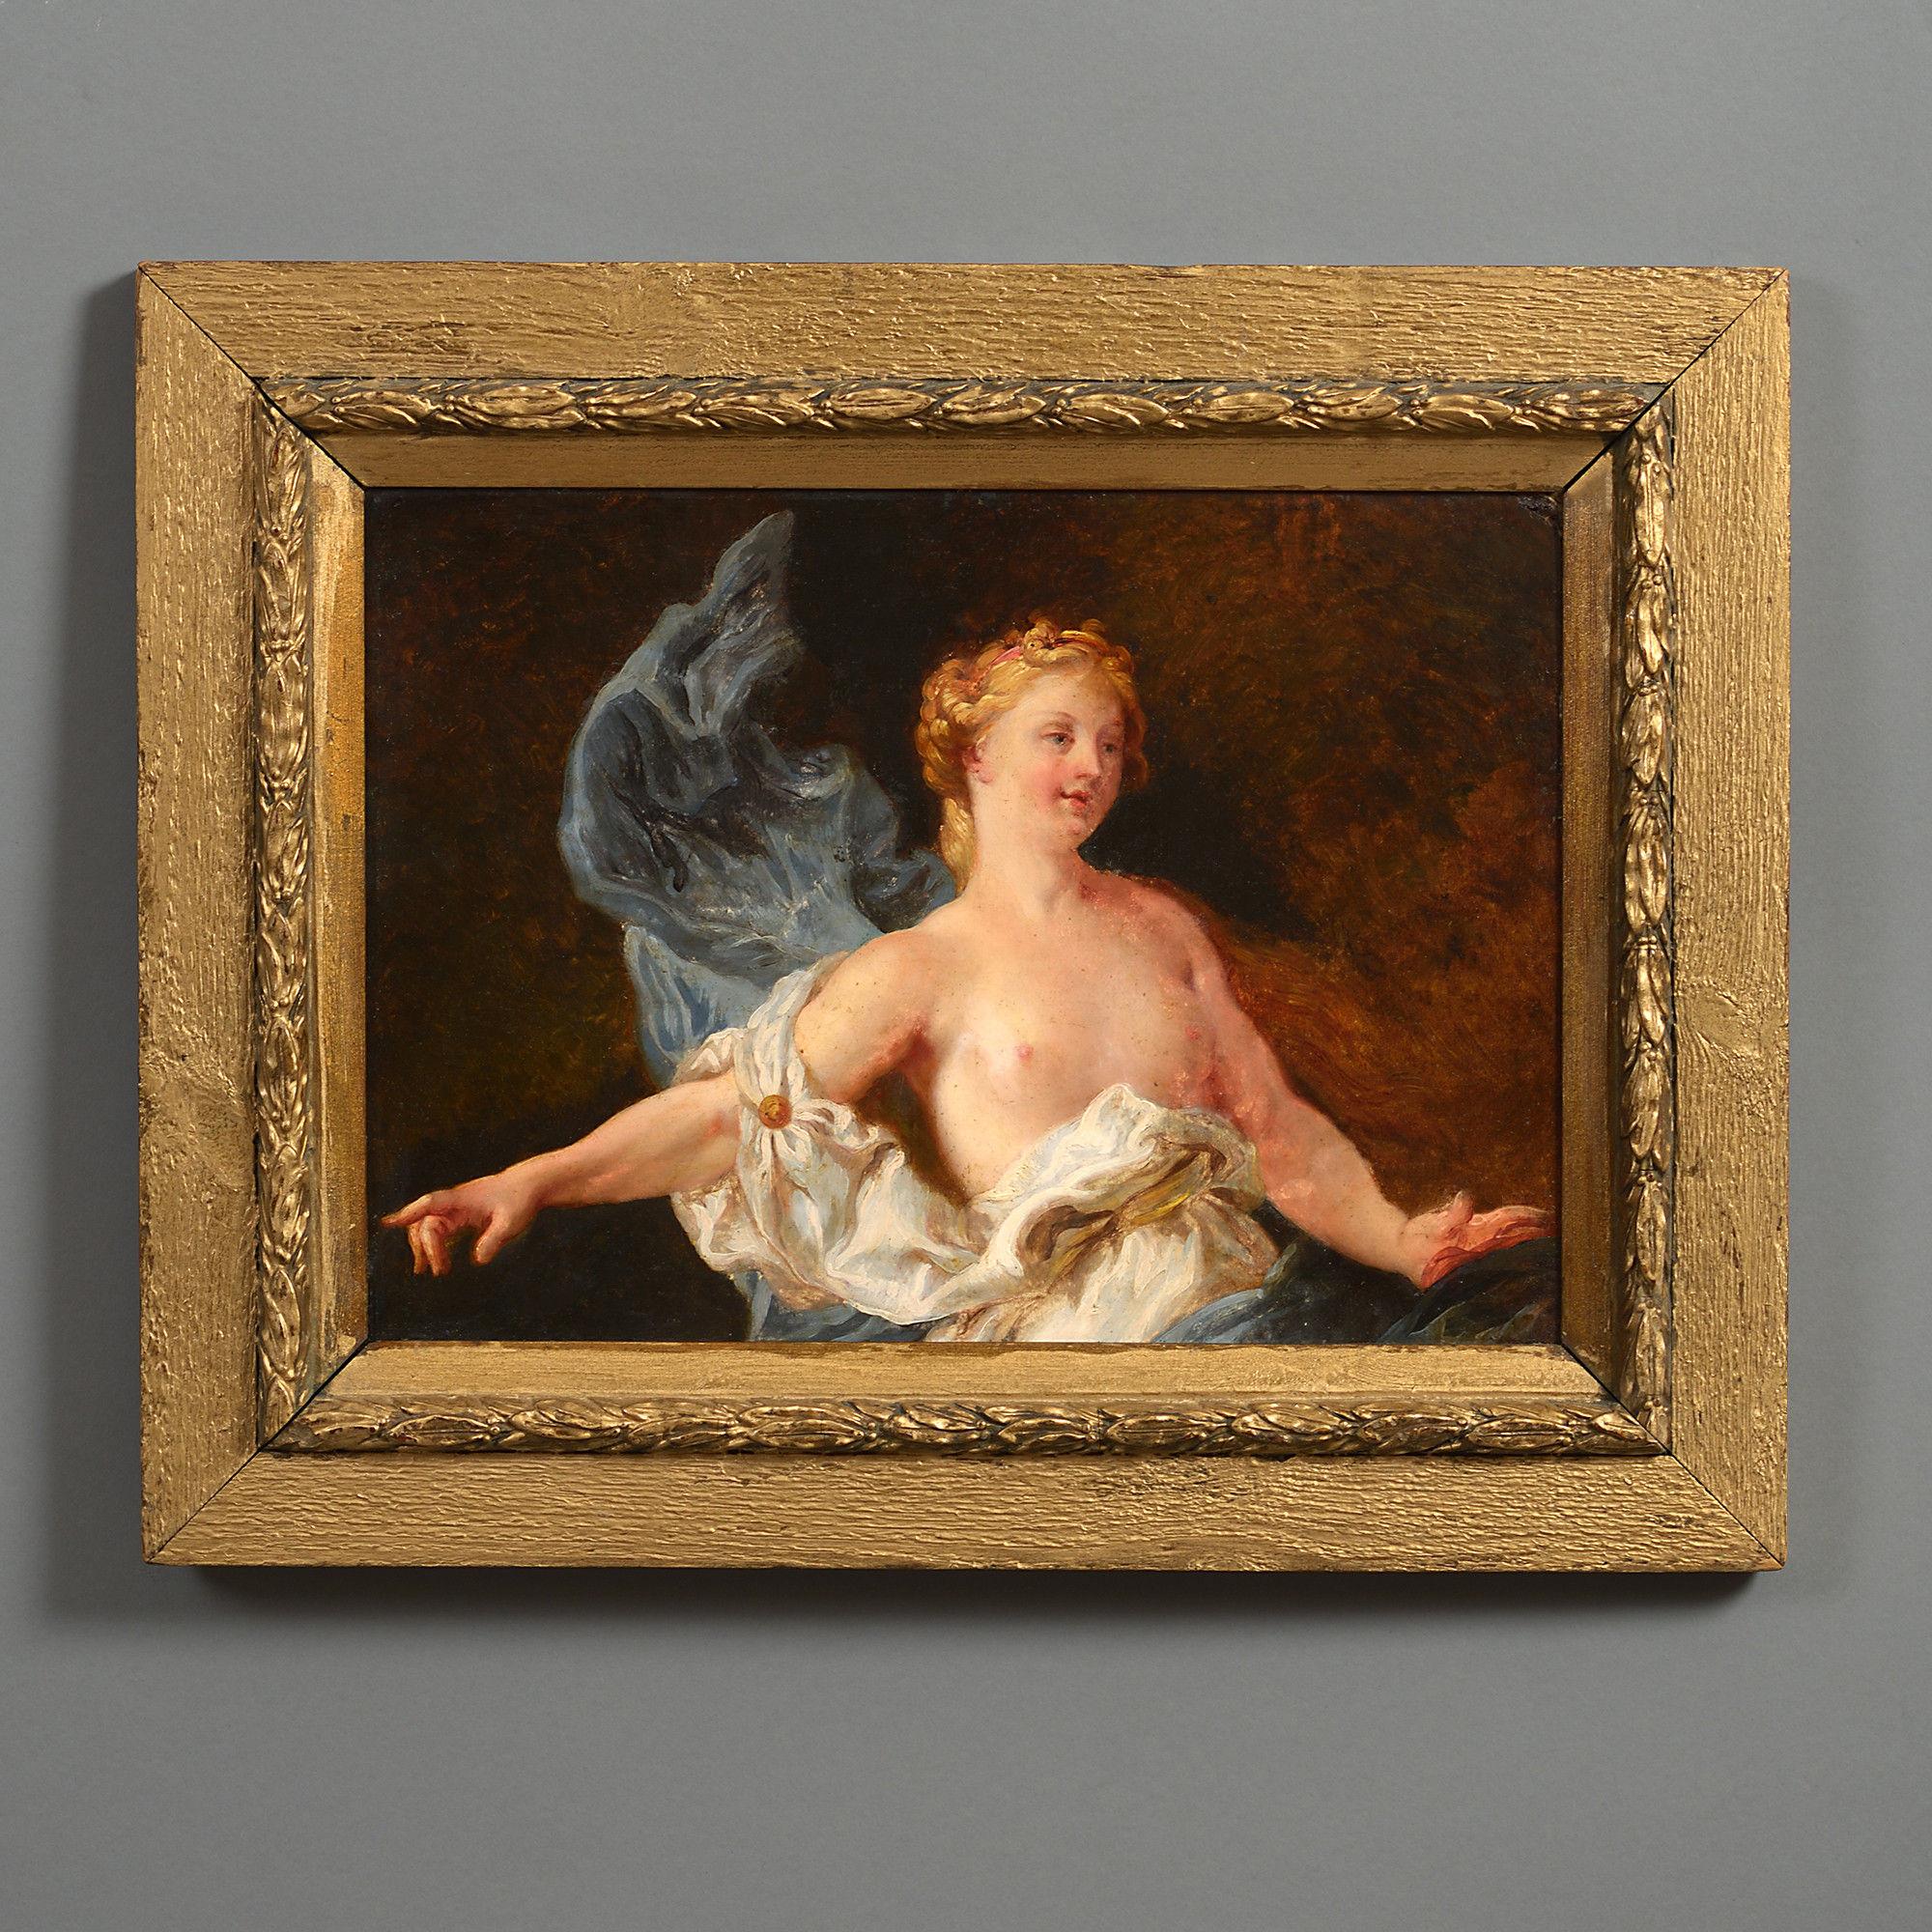 Unknown Figurative Painting – 19th Century Baroque Style Study of a Female Figure Oil on Board